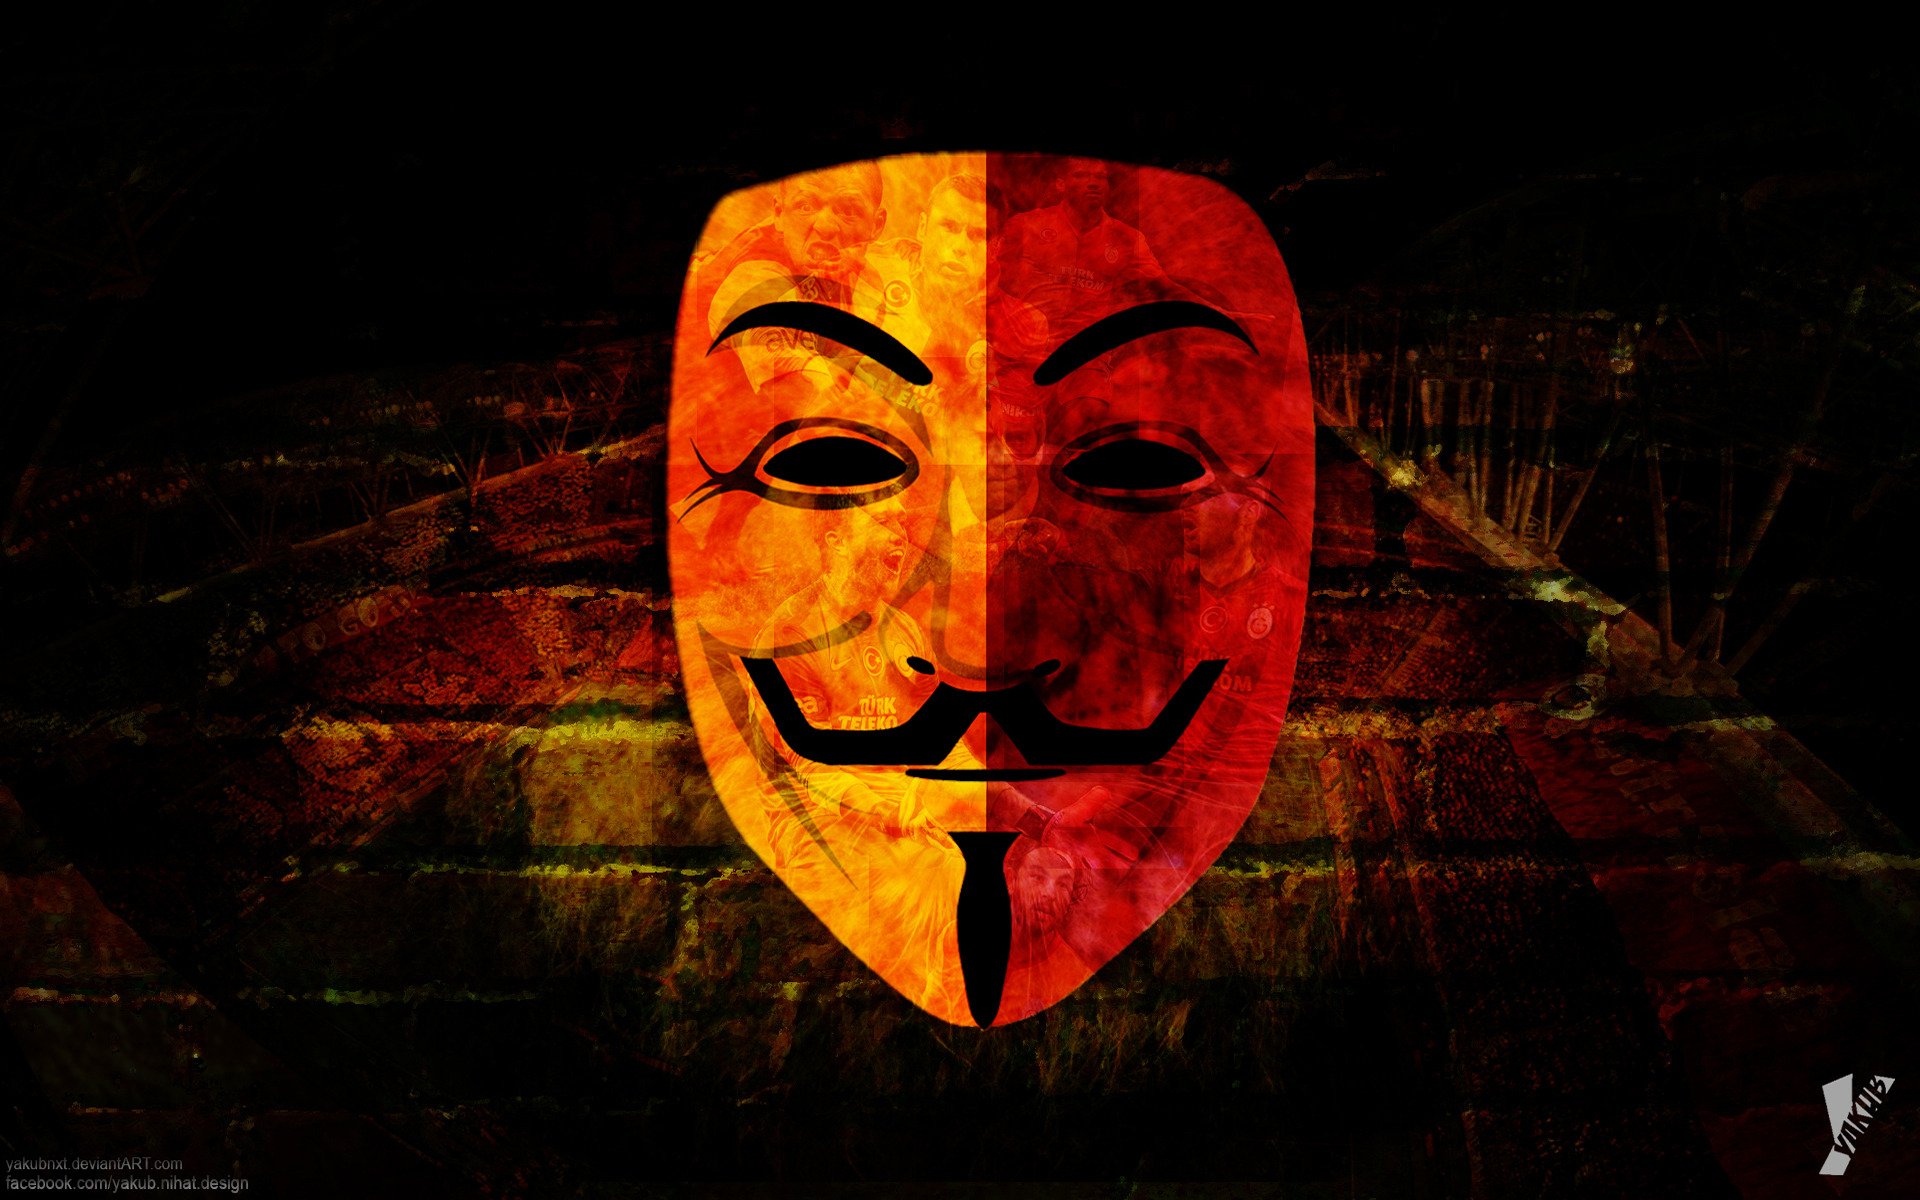 Anonymous, Hacking Wallpaper